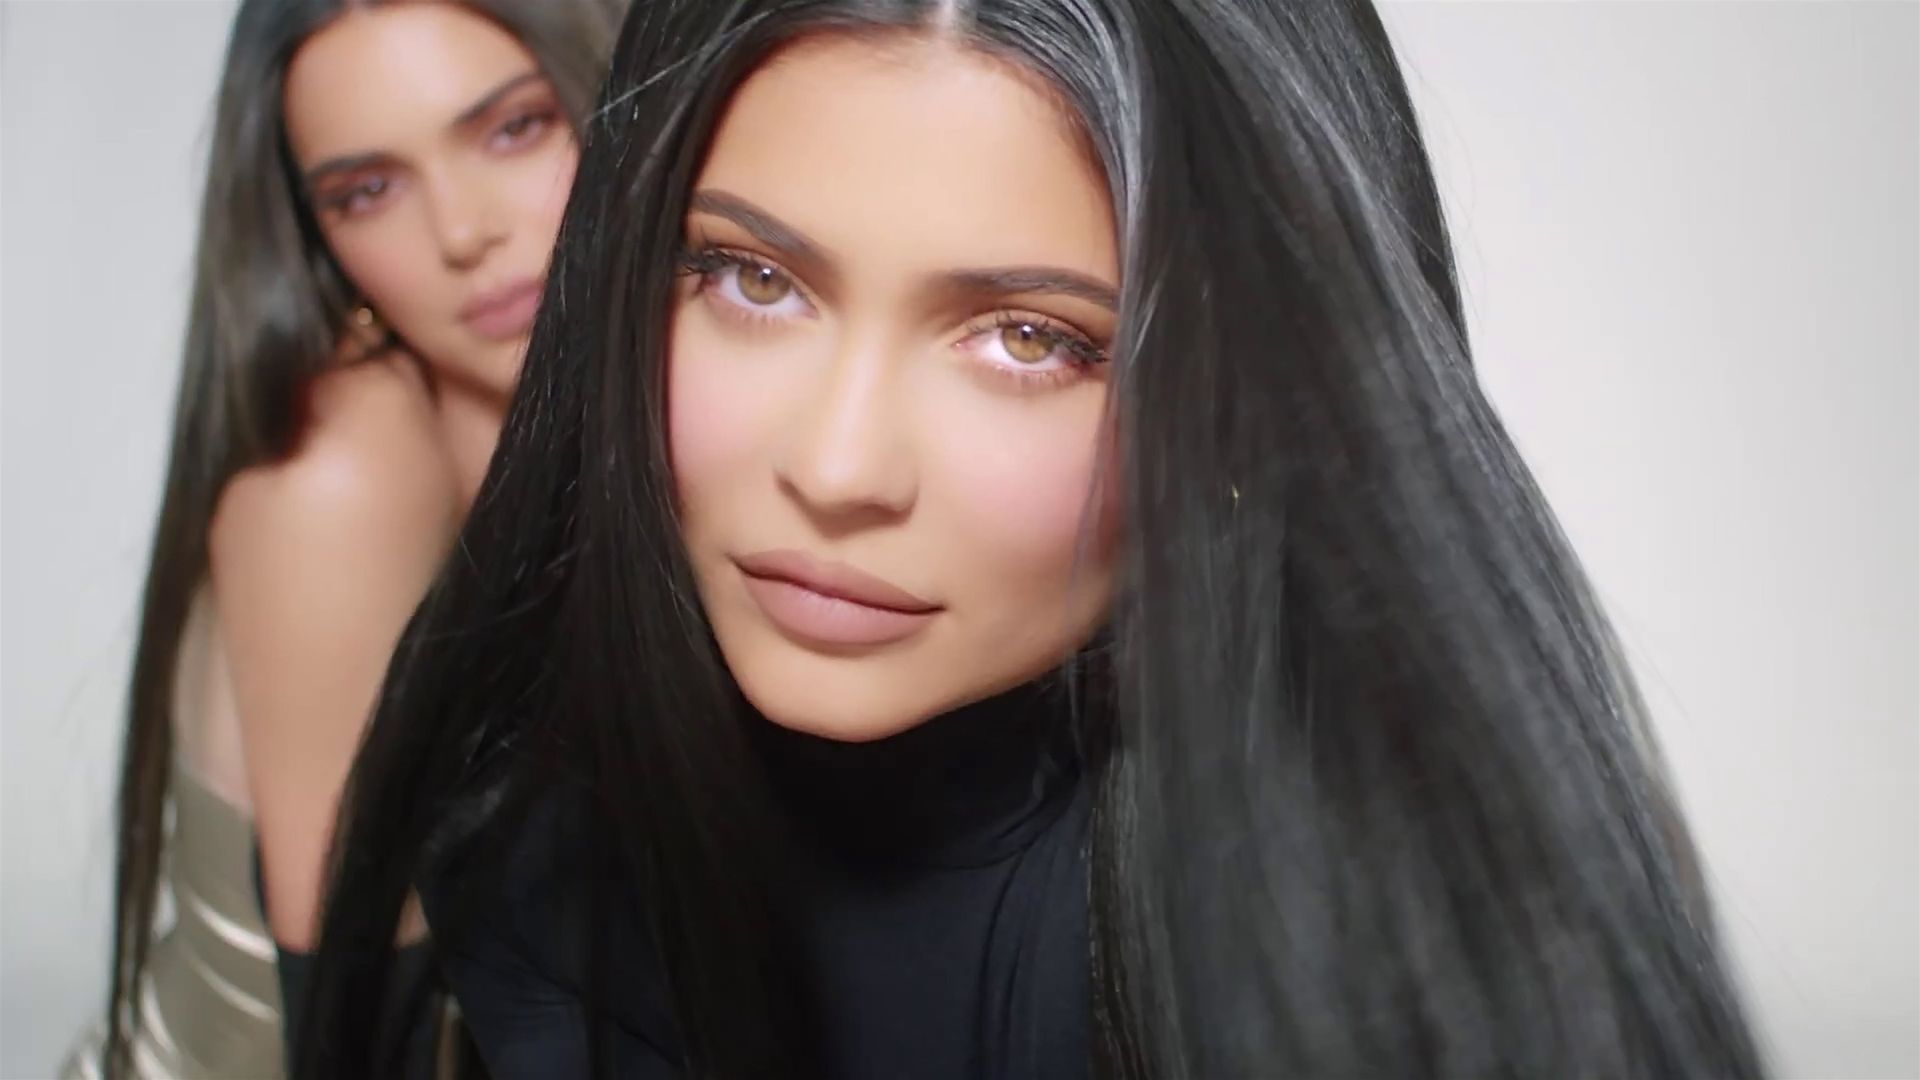 Kendall & Kylie Jenner Present Their New Cosmetic Collection (66 Pics + Video)